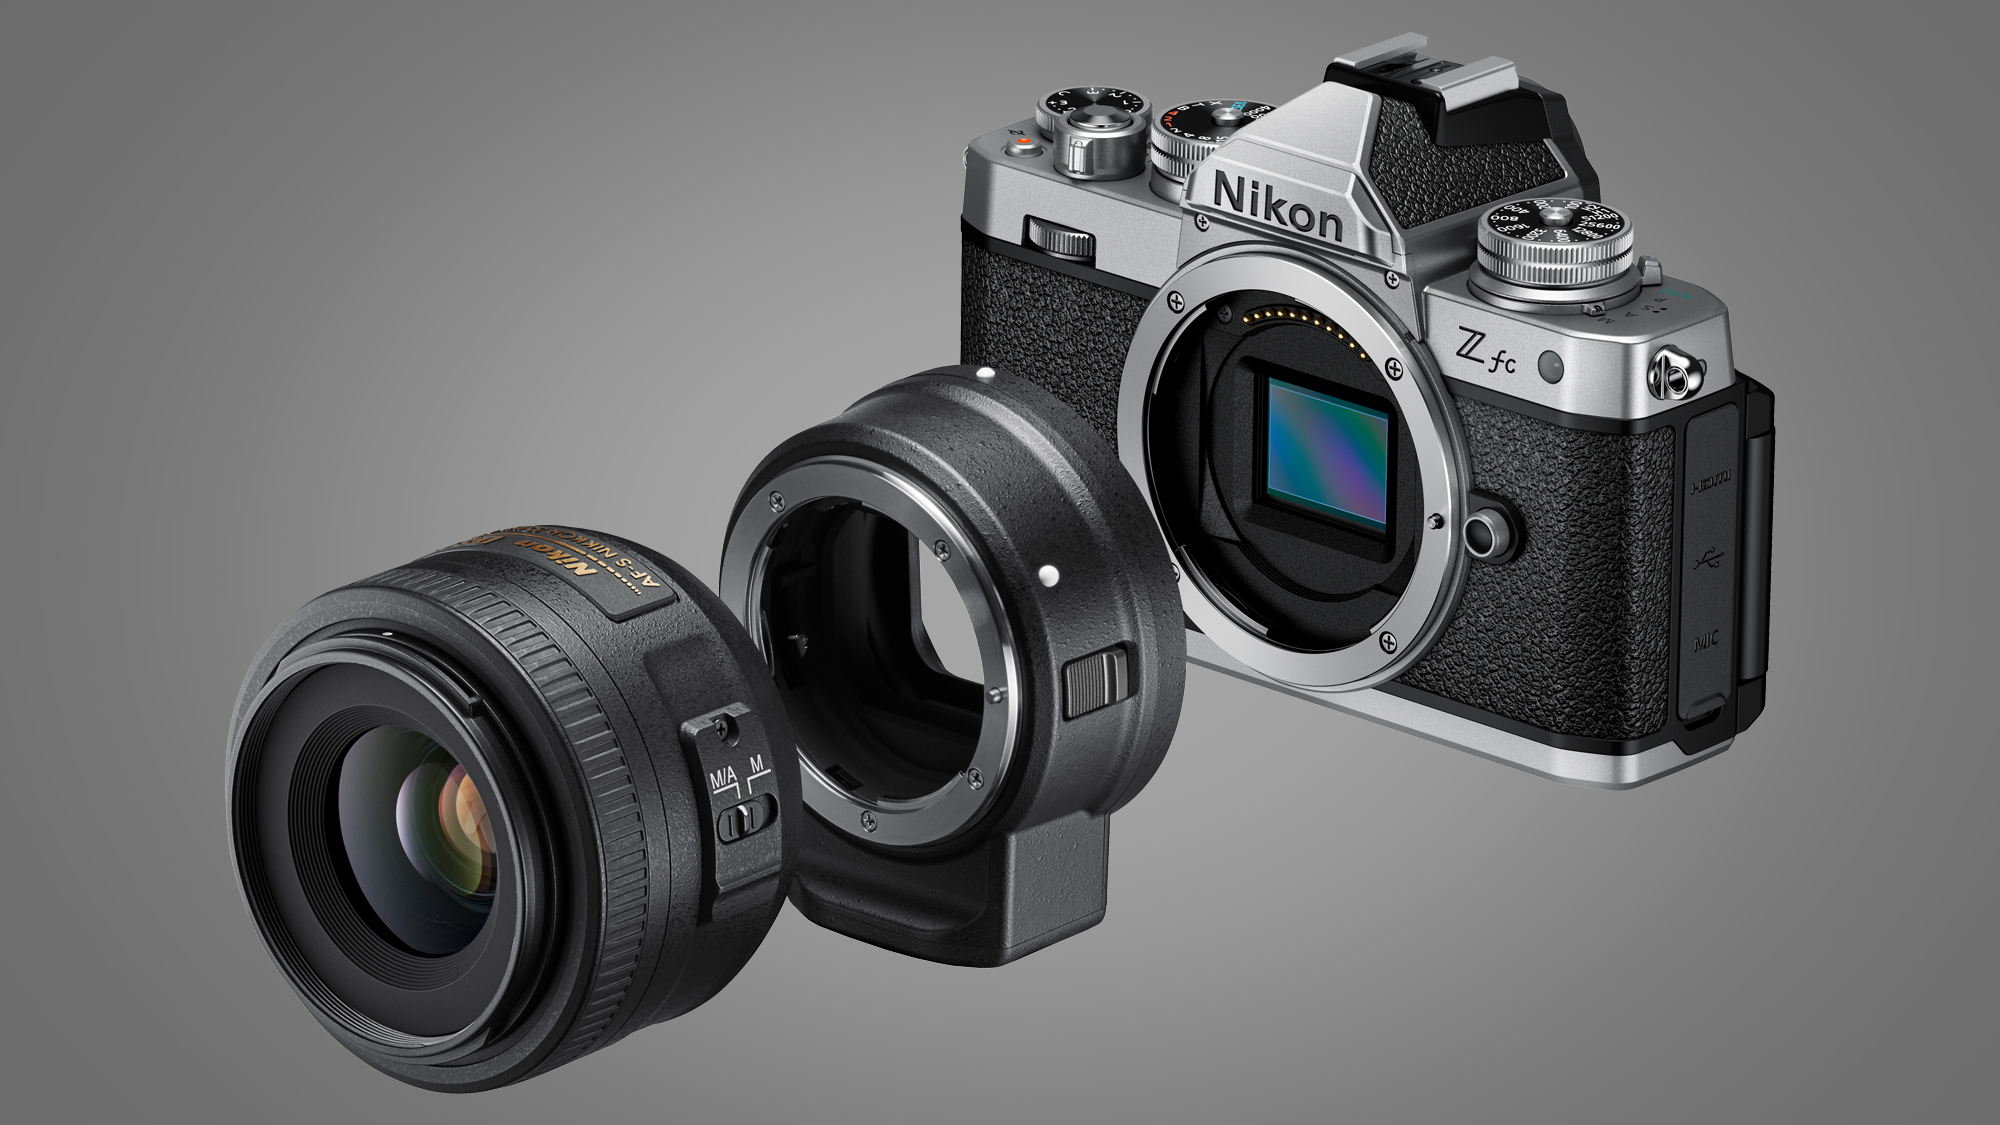 Image of the Nikon Zfc with the FTZ adaptor